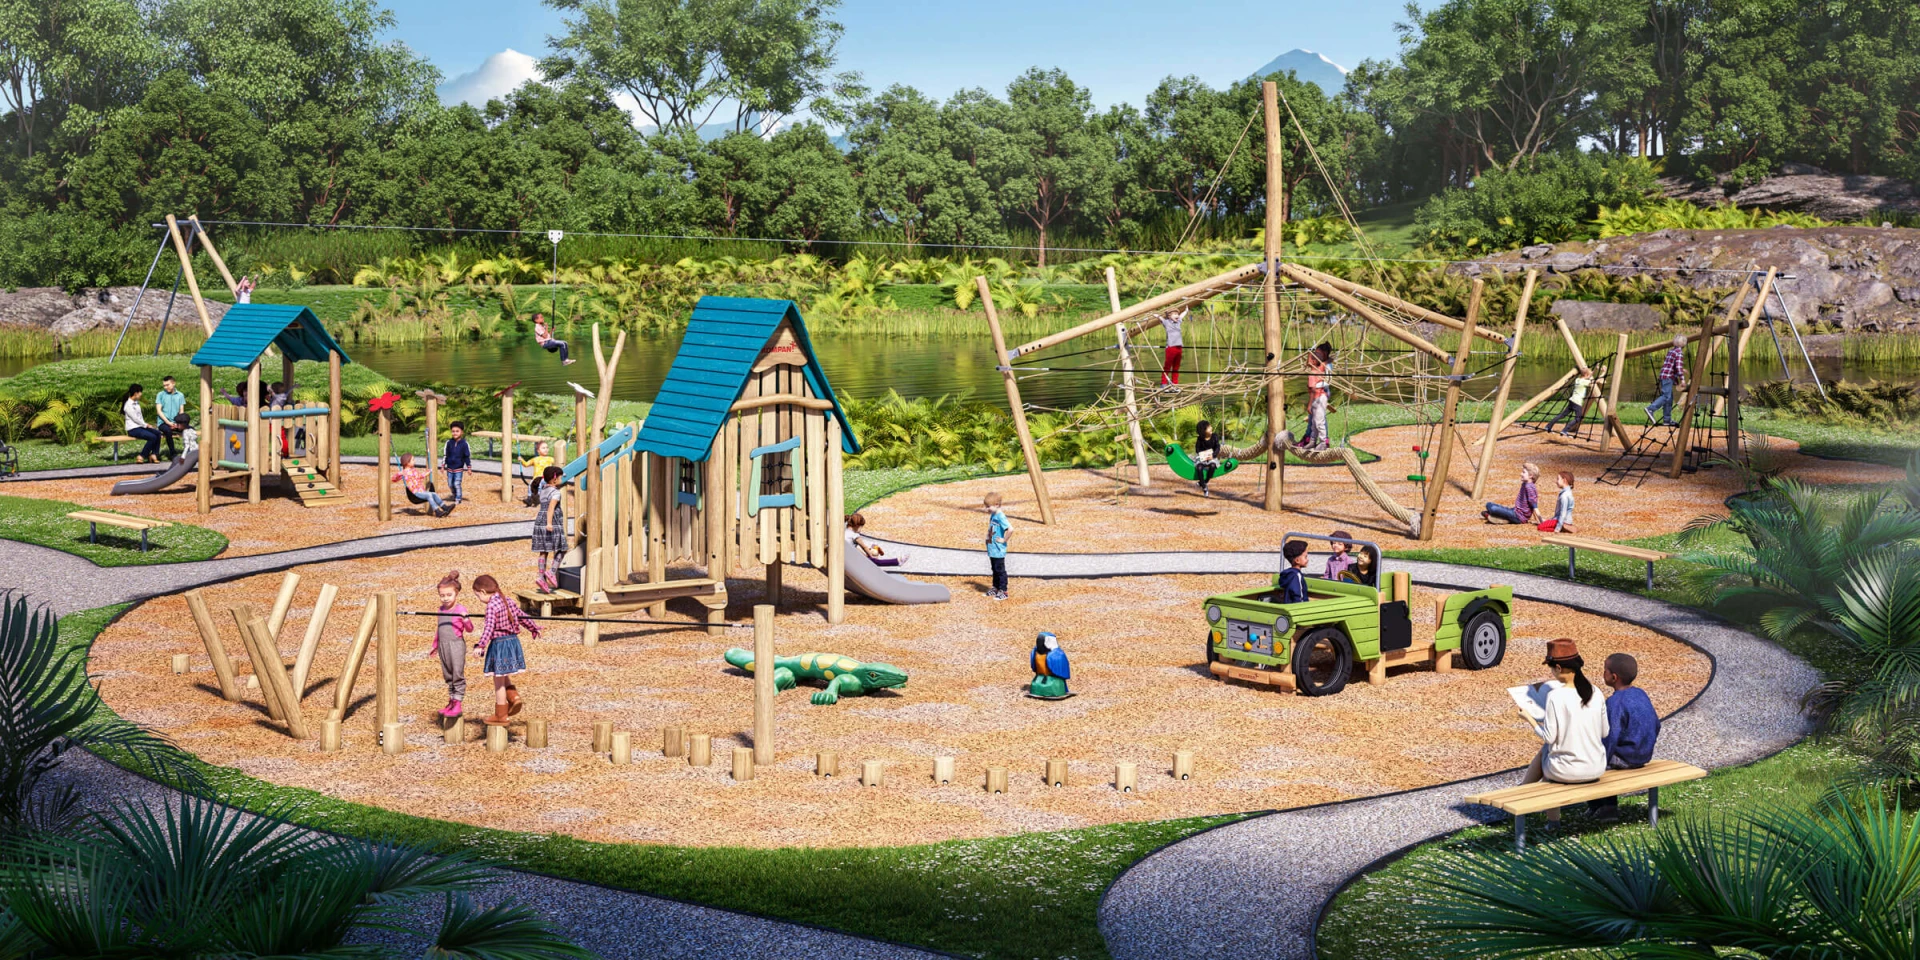 design idea of a natural wooden playground in a park